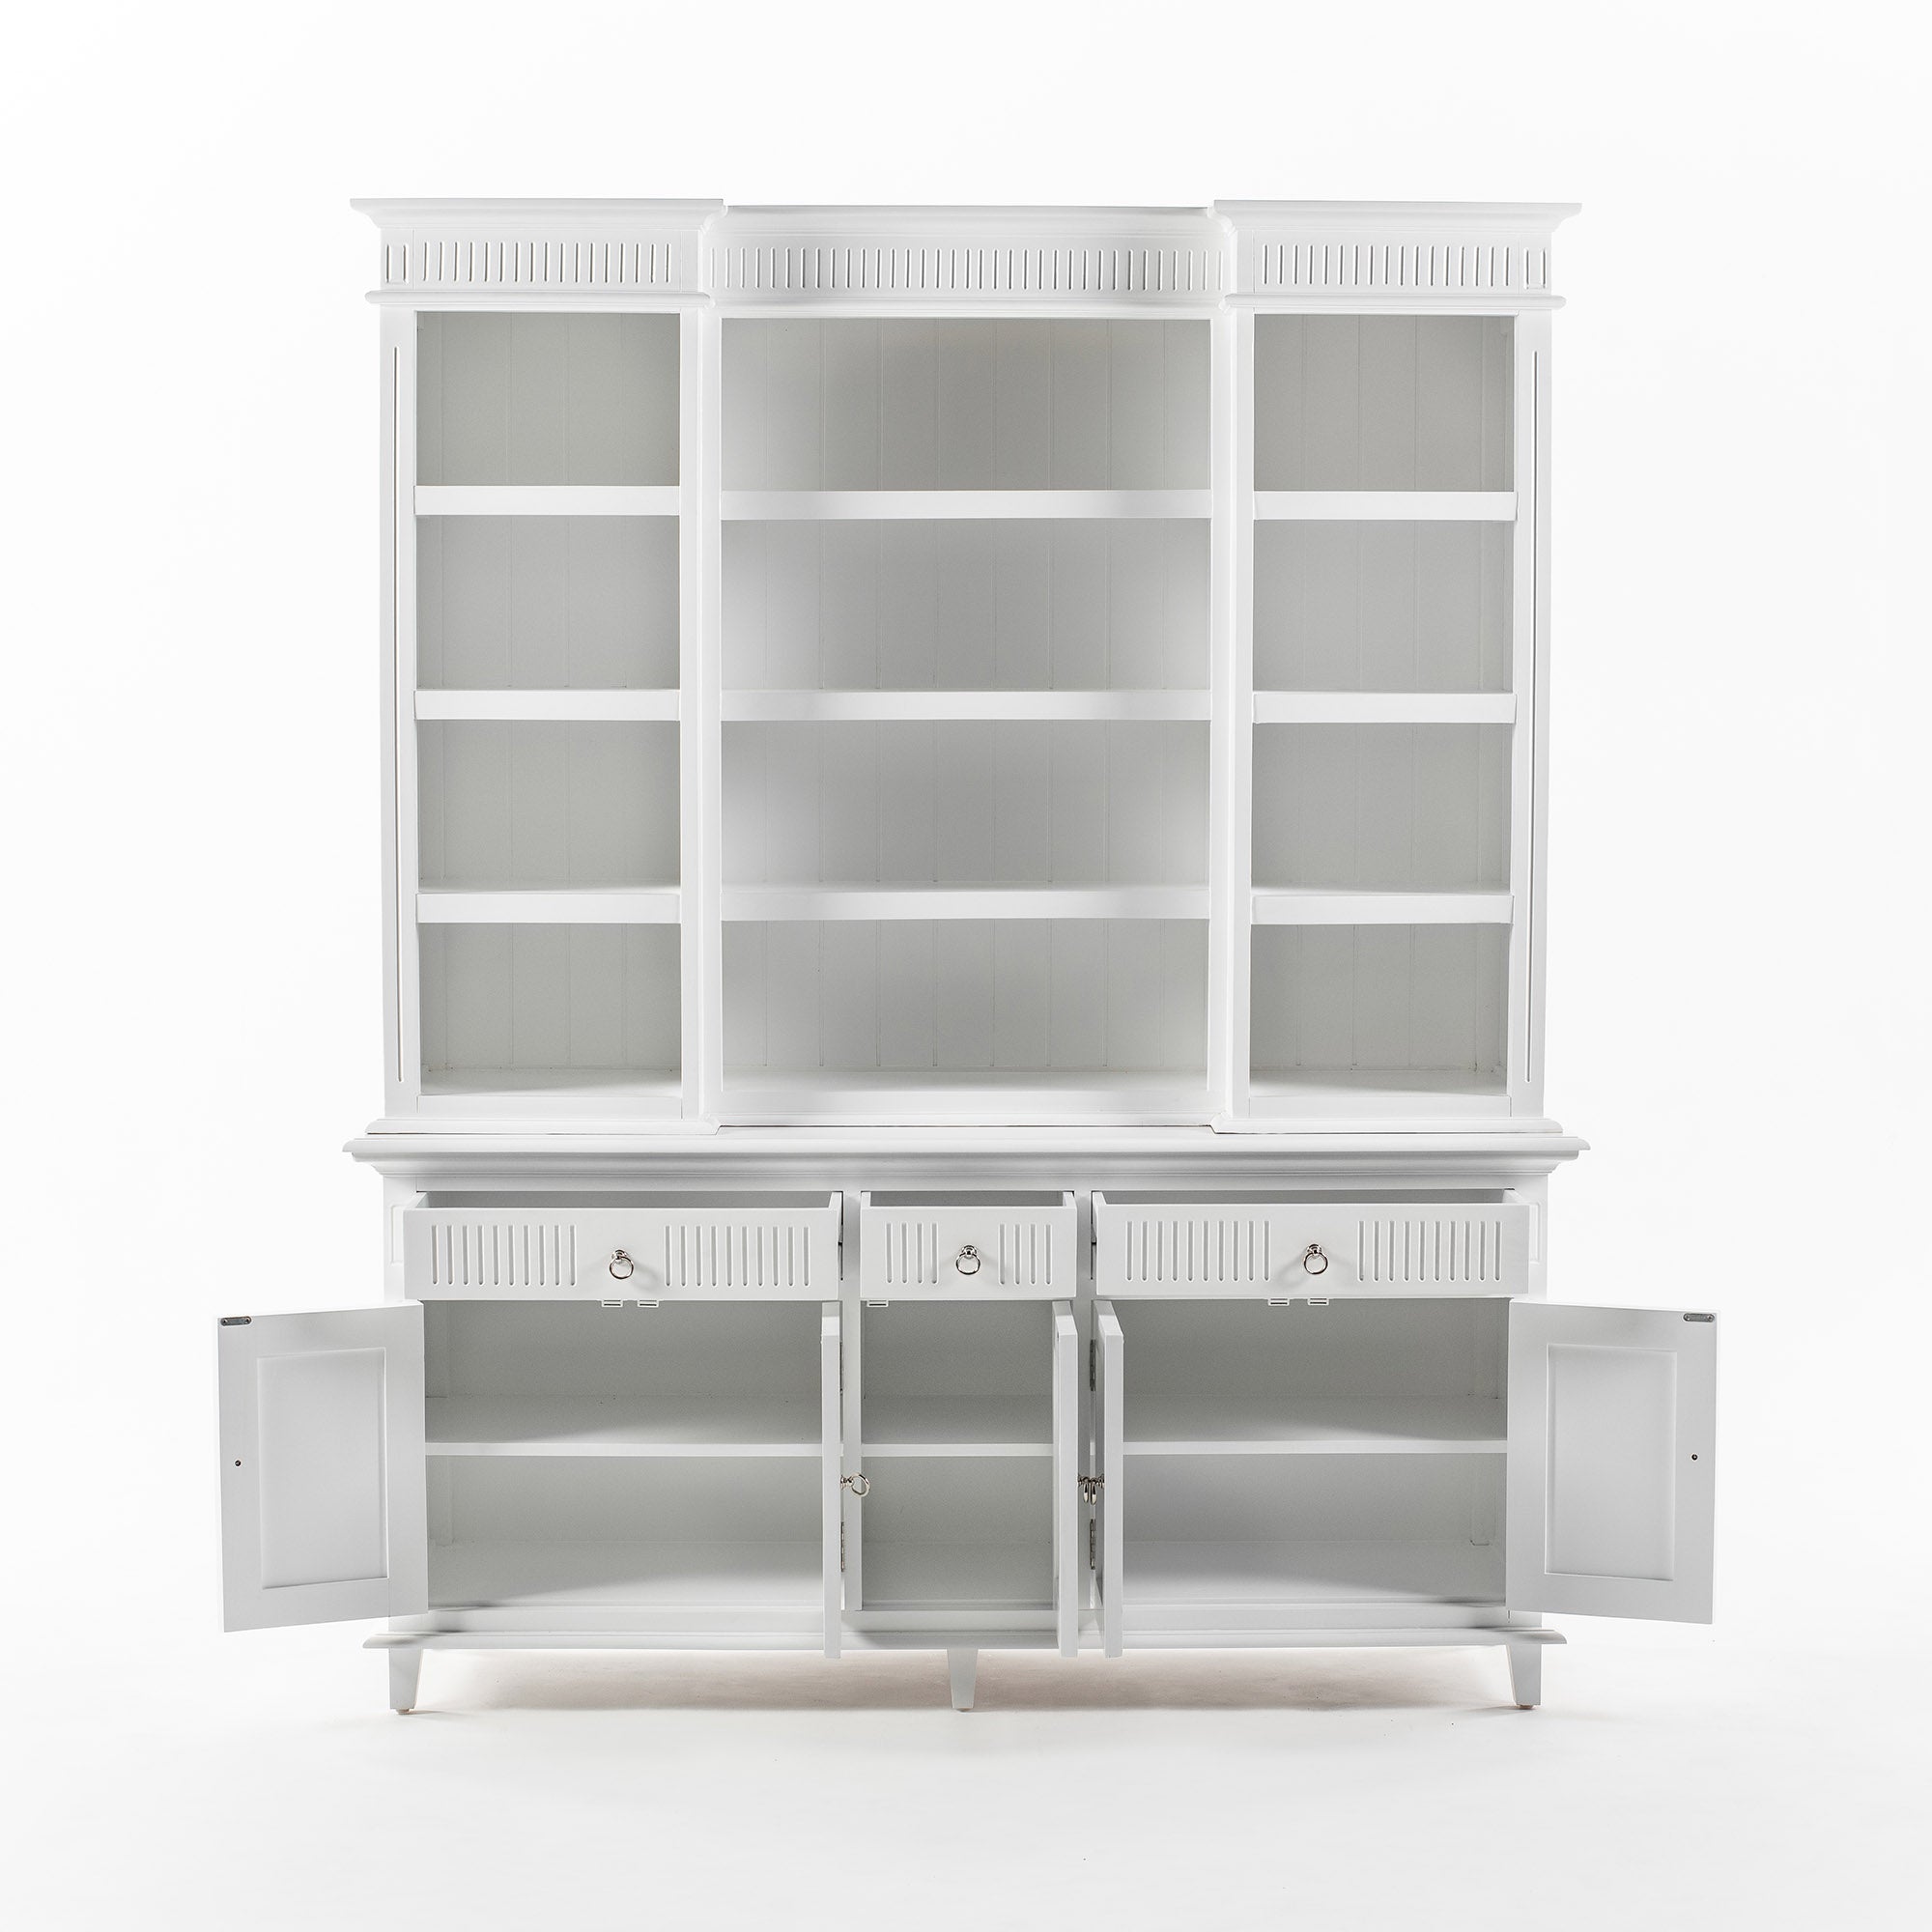 Skansen Nordic Design Classic White Kitchen Hutch Cabinet with 5 Doors 3 Drawers